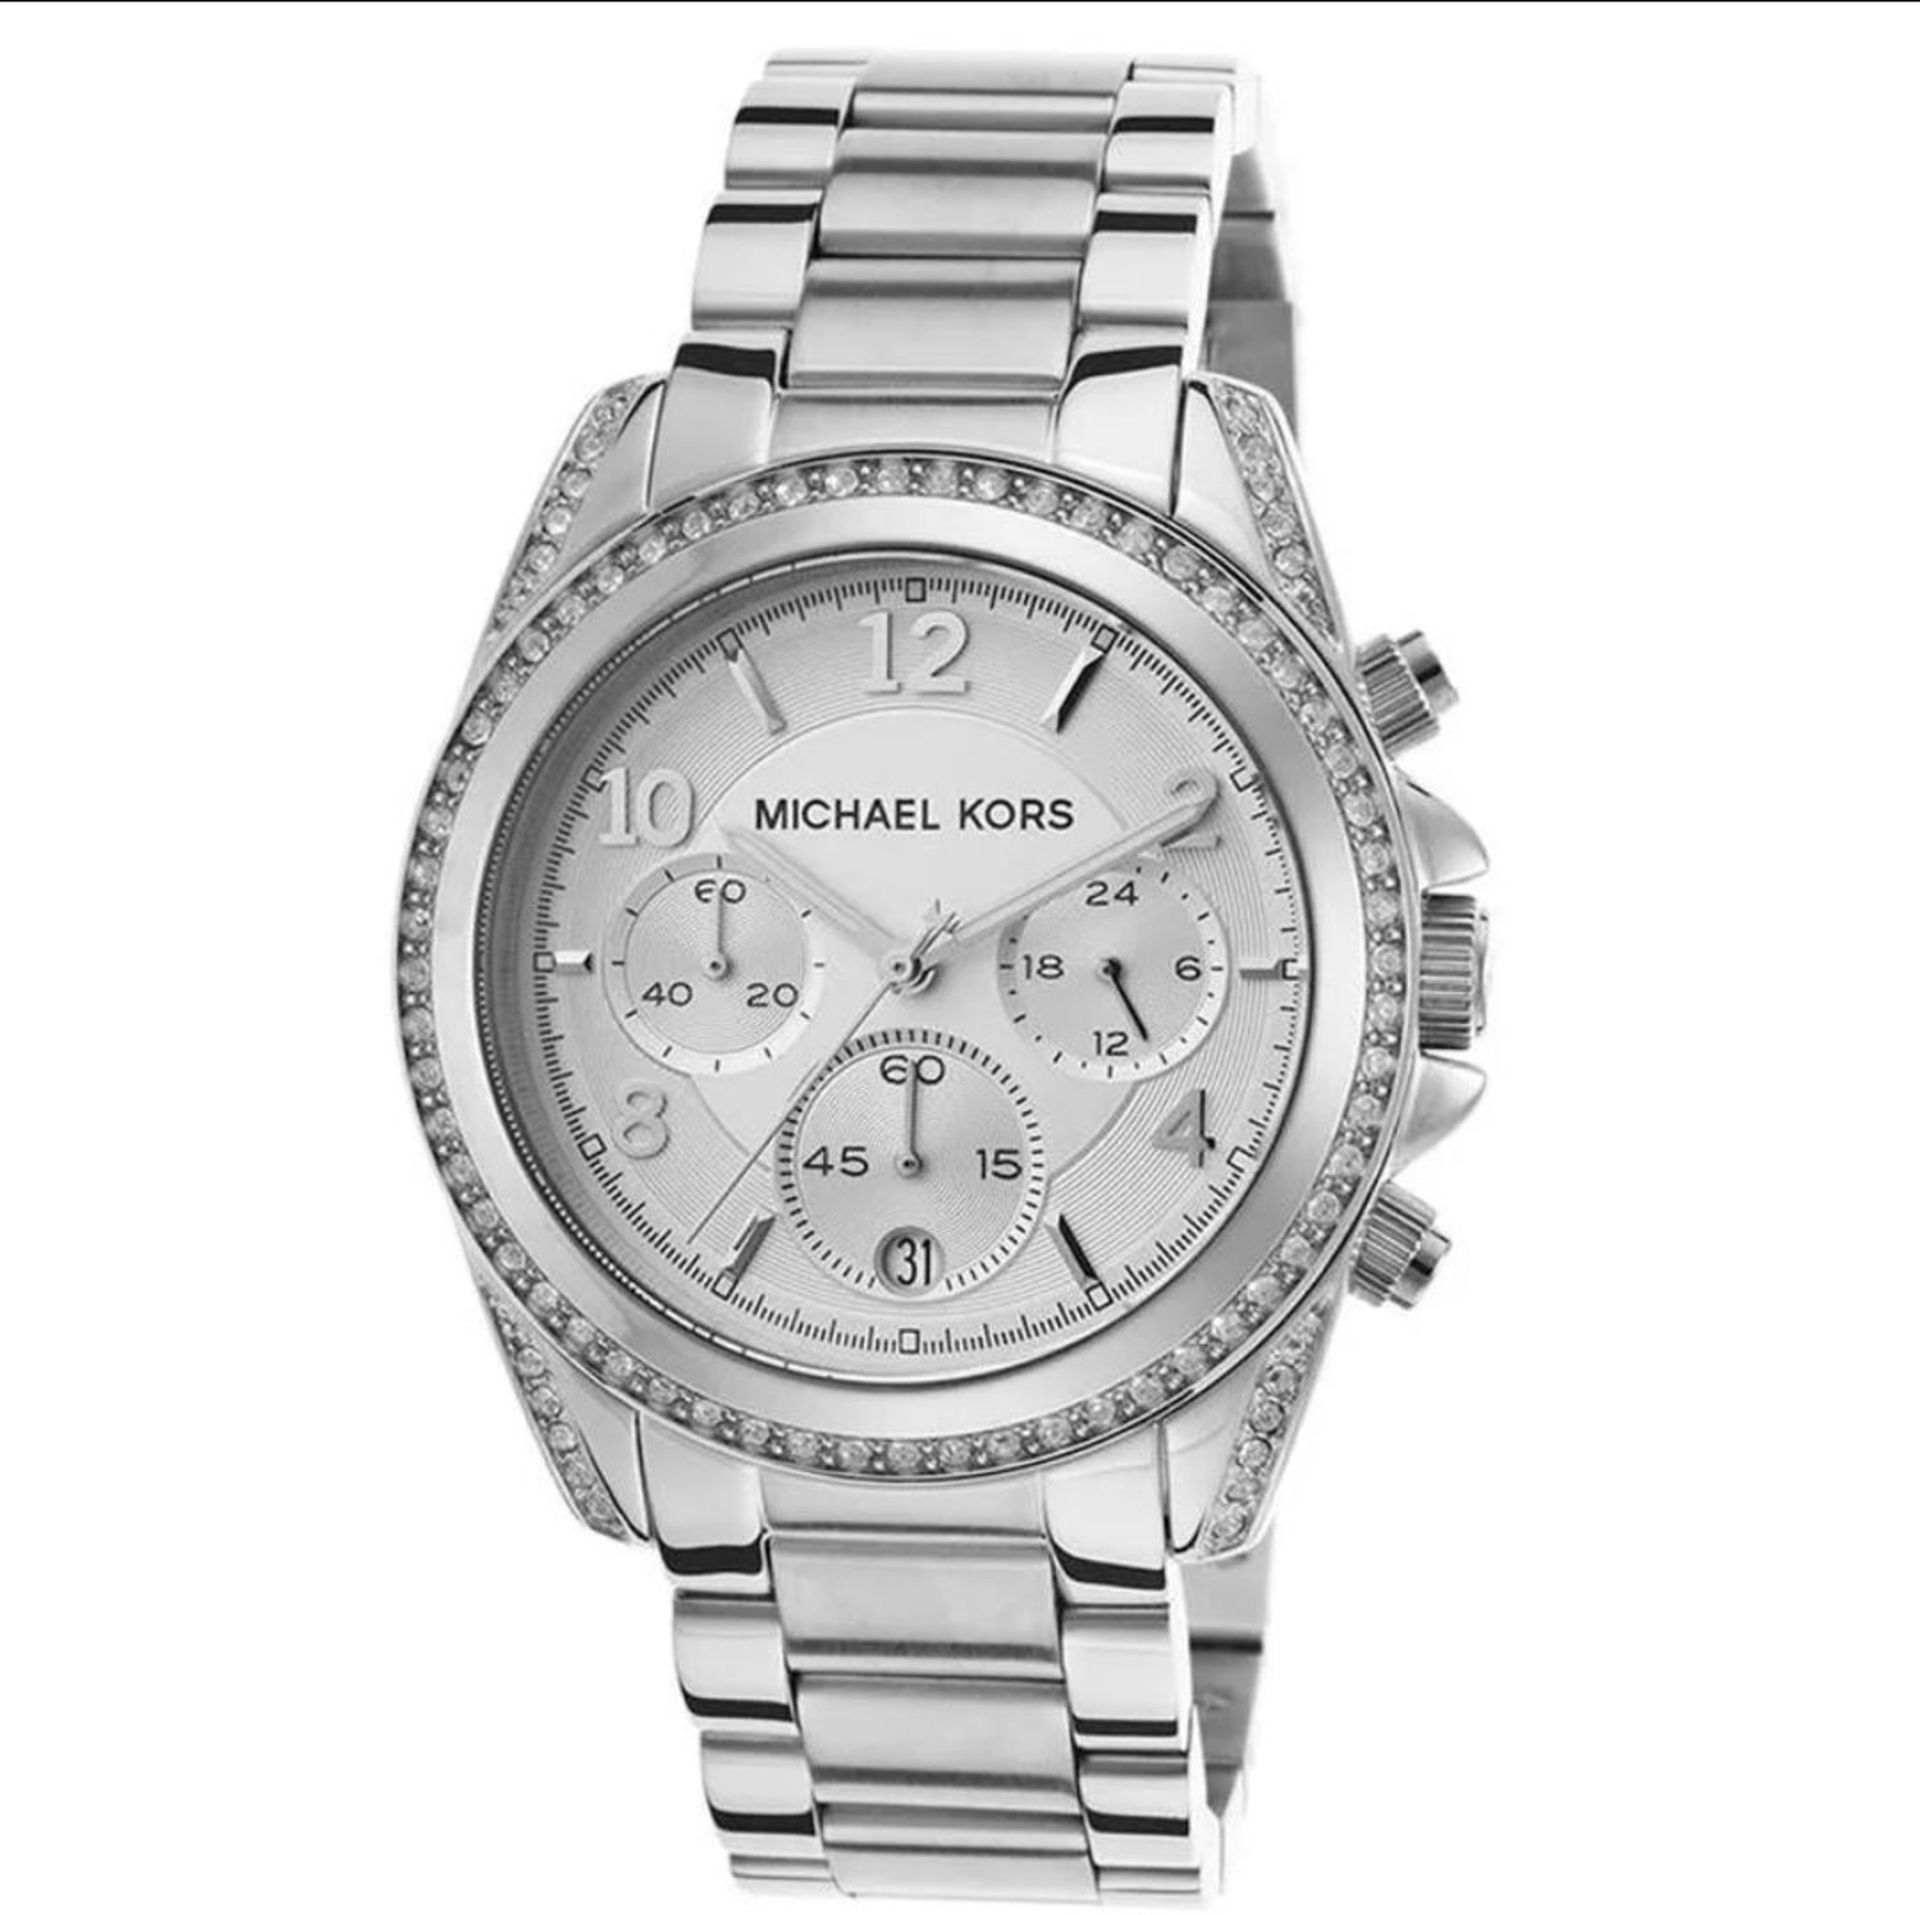 BRAND NEW MICHAEL KORS MK5165, LADIES DESIGNER WATCH, COMPLETE WITH ORIGINAL BOX AND MANUAL - RRP £